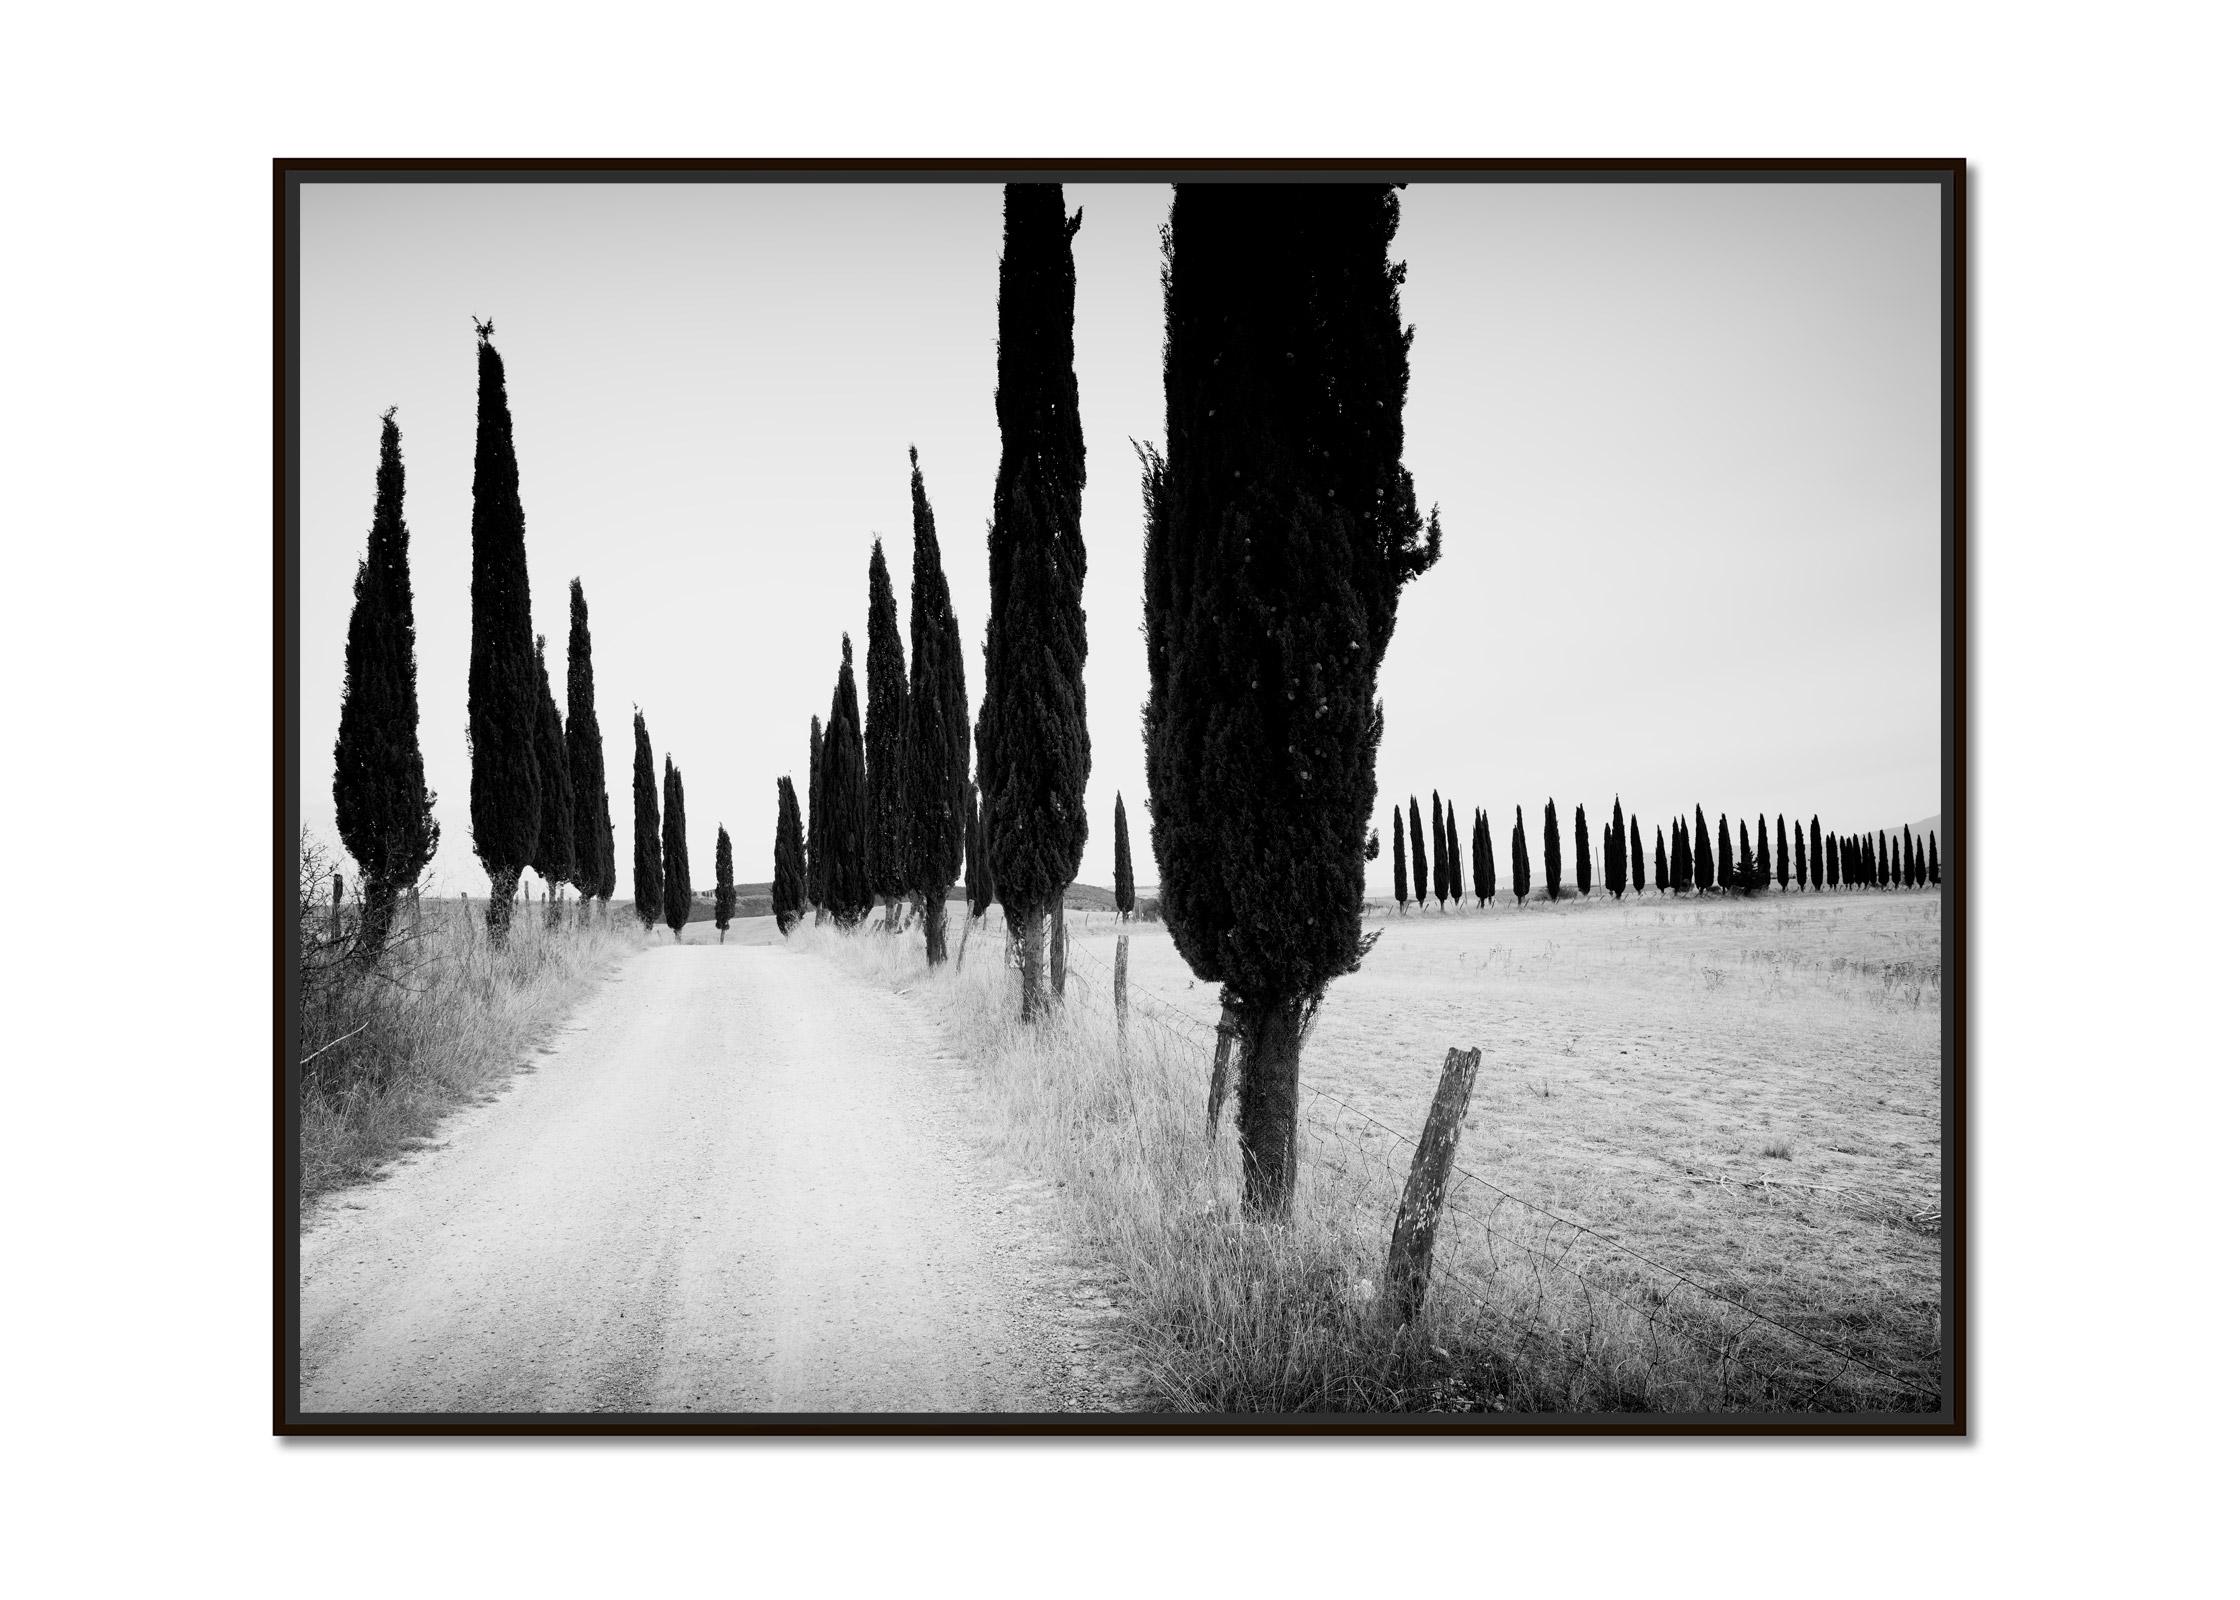 Cypress Tree Avenue, Tuscany, Italy, black and white photography, art landscape - Photograph by Gerald Berghammer